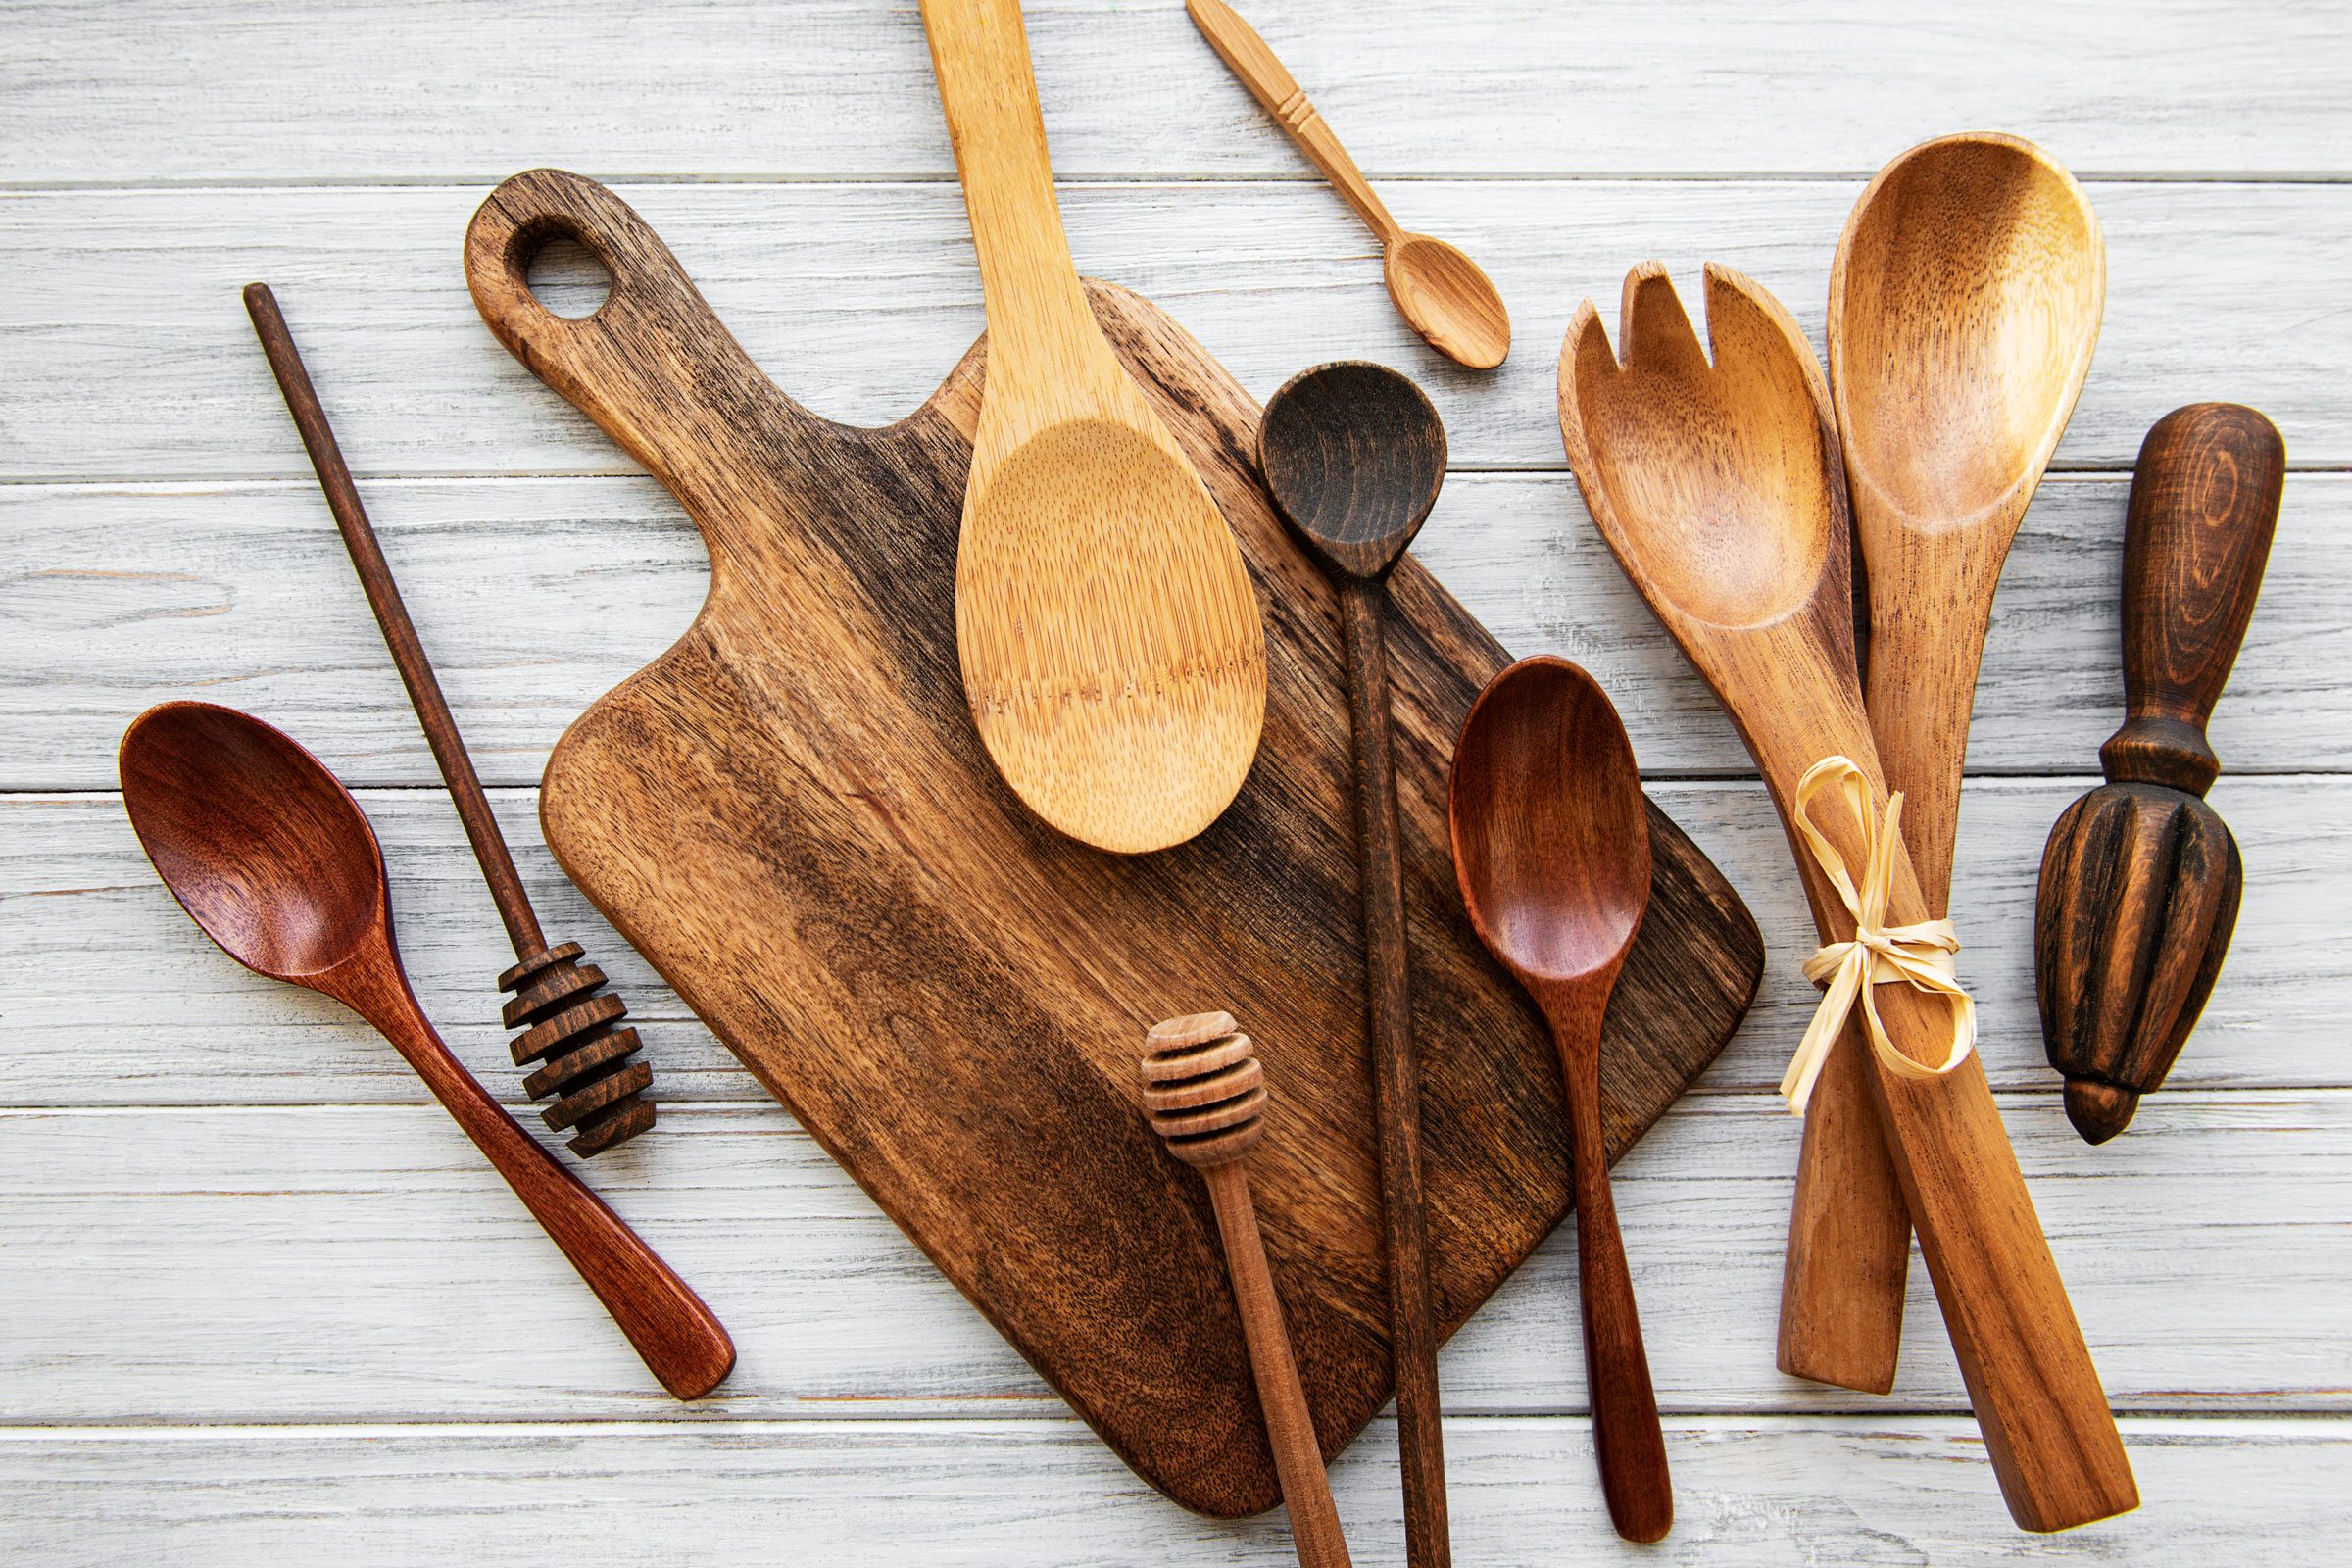 https://www.tasteofhome.com/wp-content/uploads/2023/11/GettyImages-1257145543-wooden-spoons.jpg?fit=680%2C454